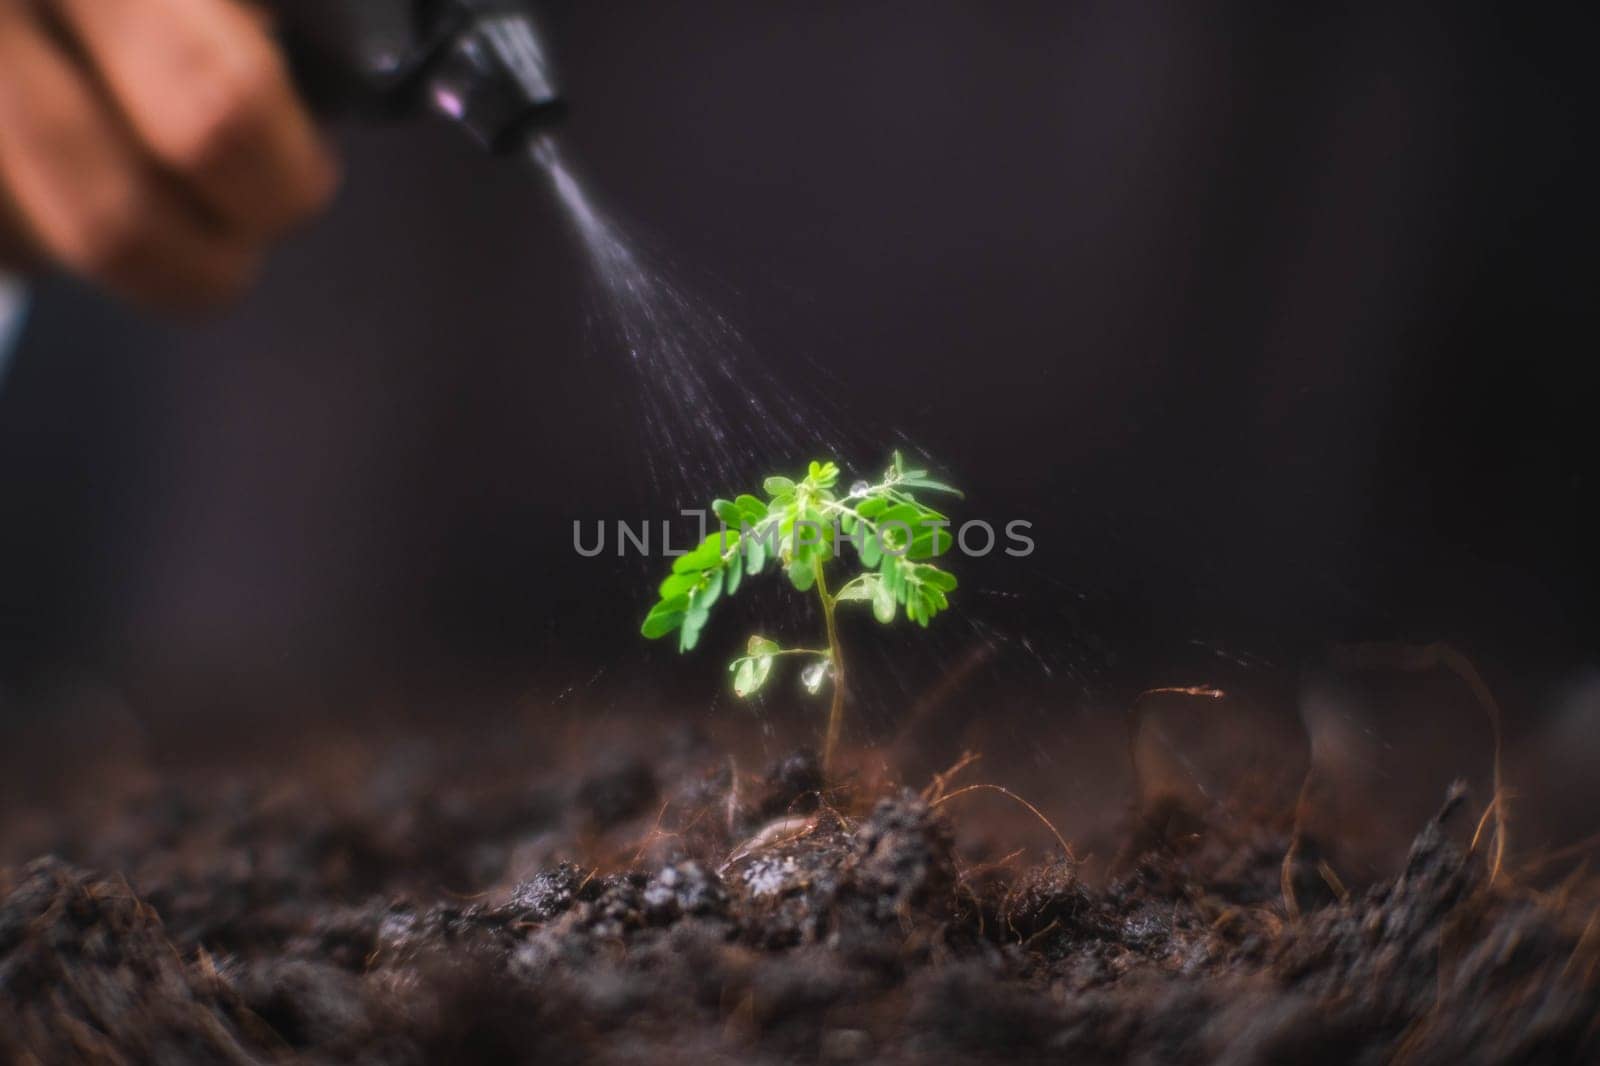 Hand watering plants that grow on the ground. New life care, watering young plants on black background. The concept of planting trees and saving the world. by TEERASAK